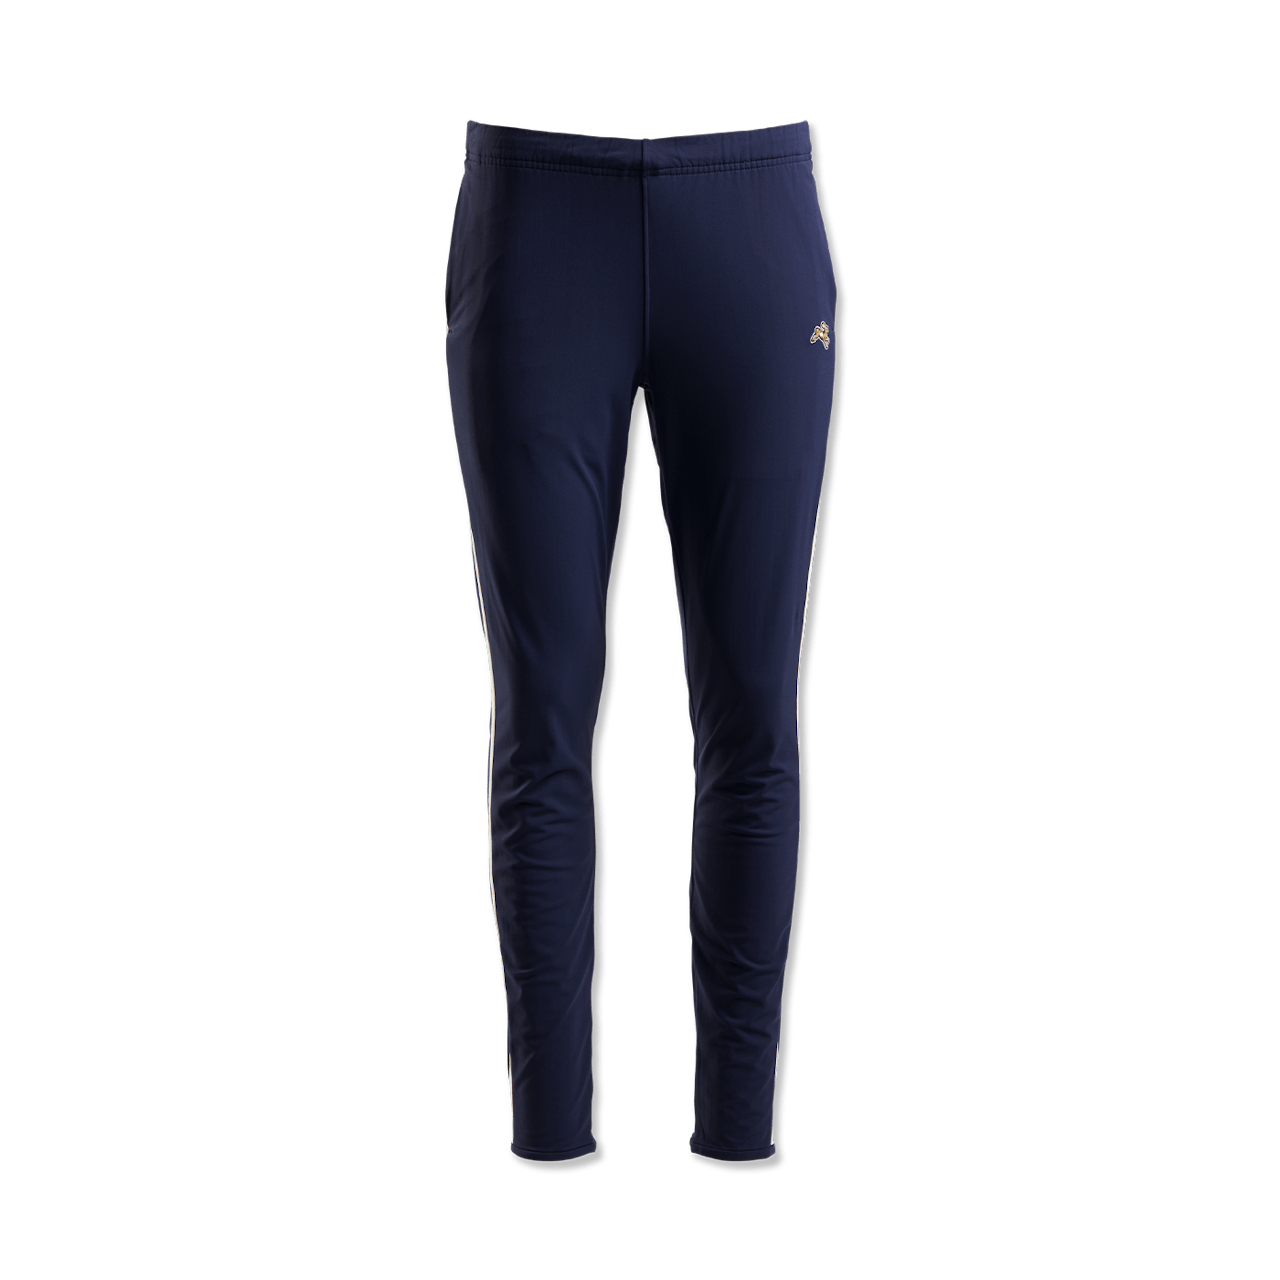 Women's Turnover Track Pants